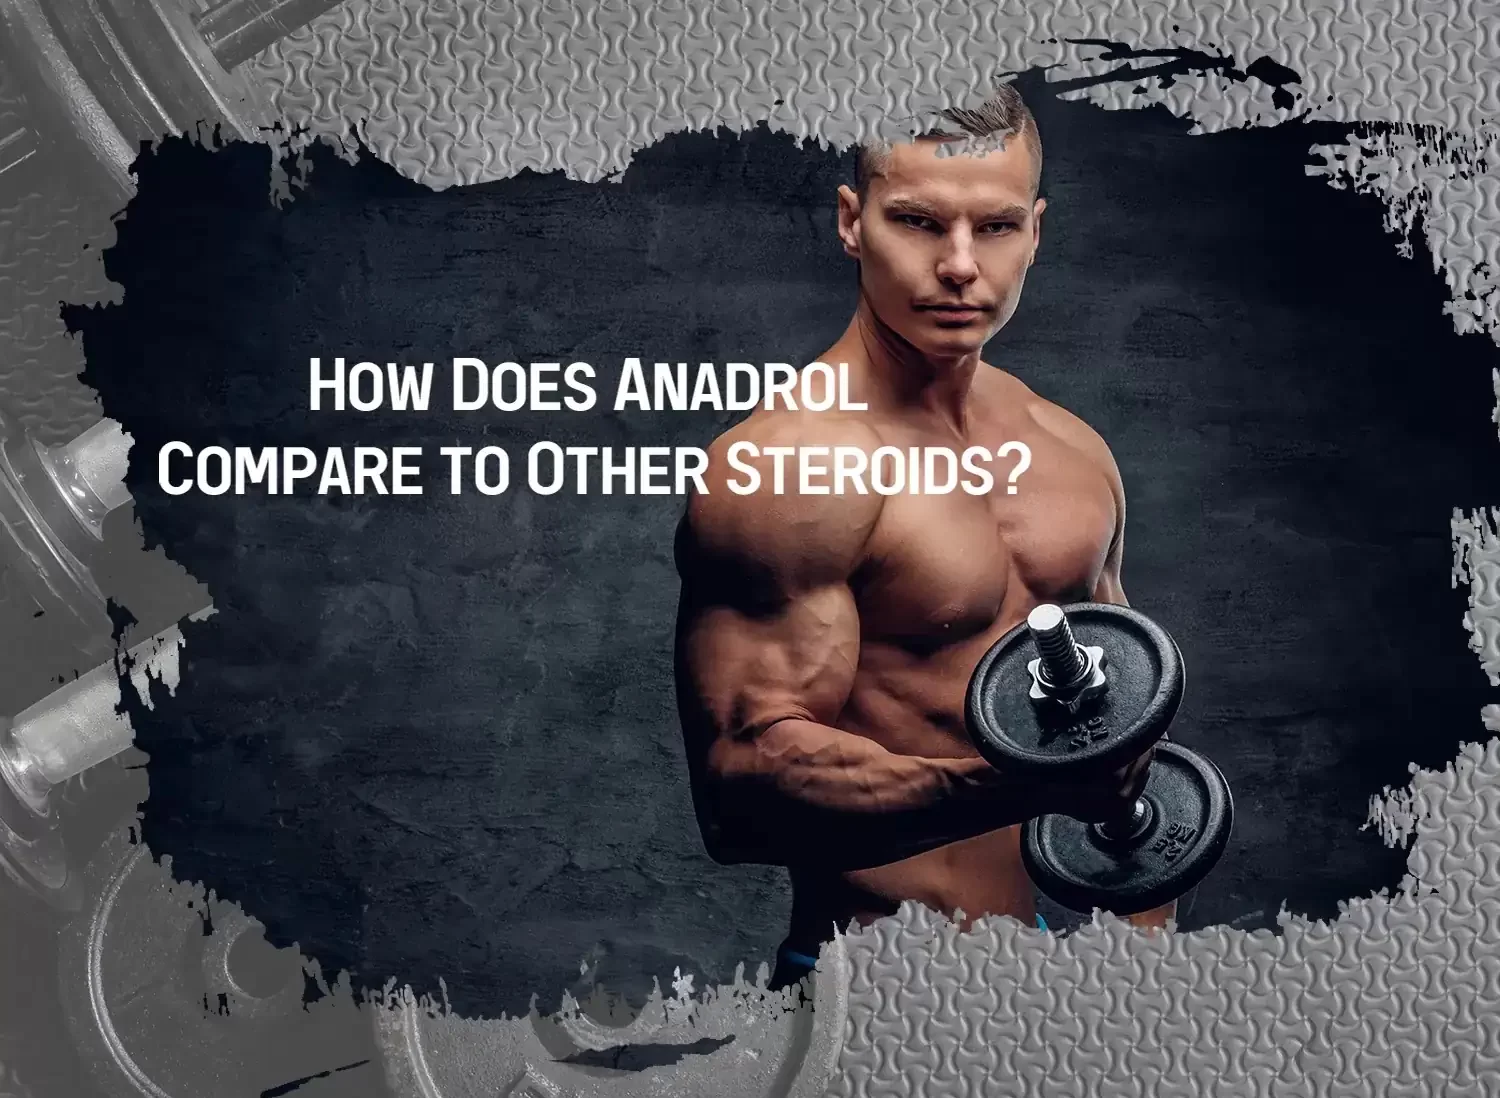 Anadrol compare to other steroids